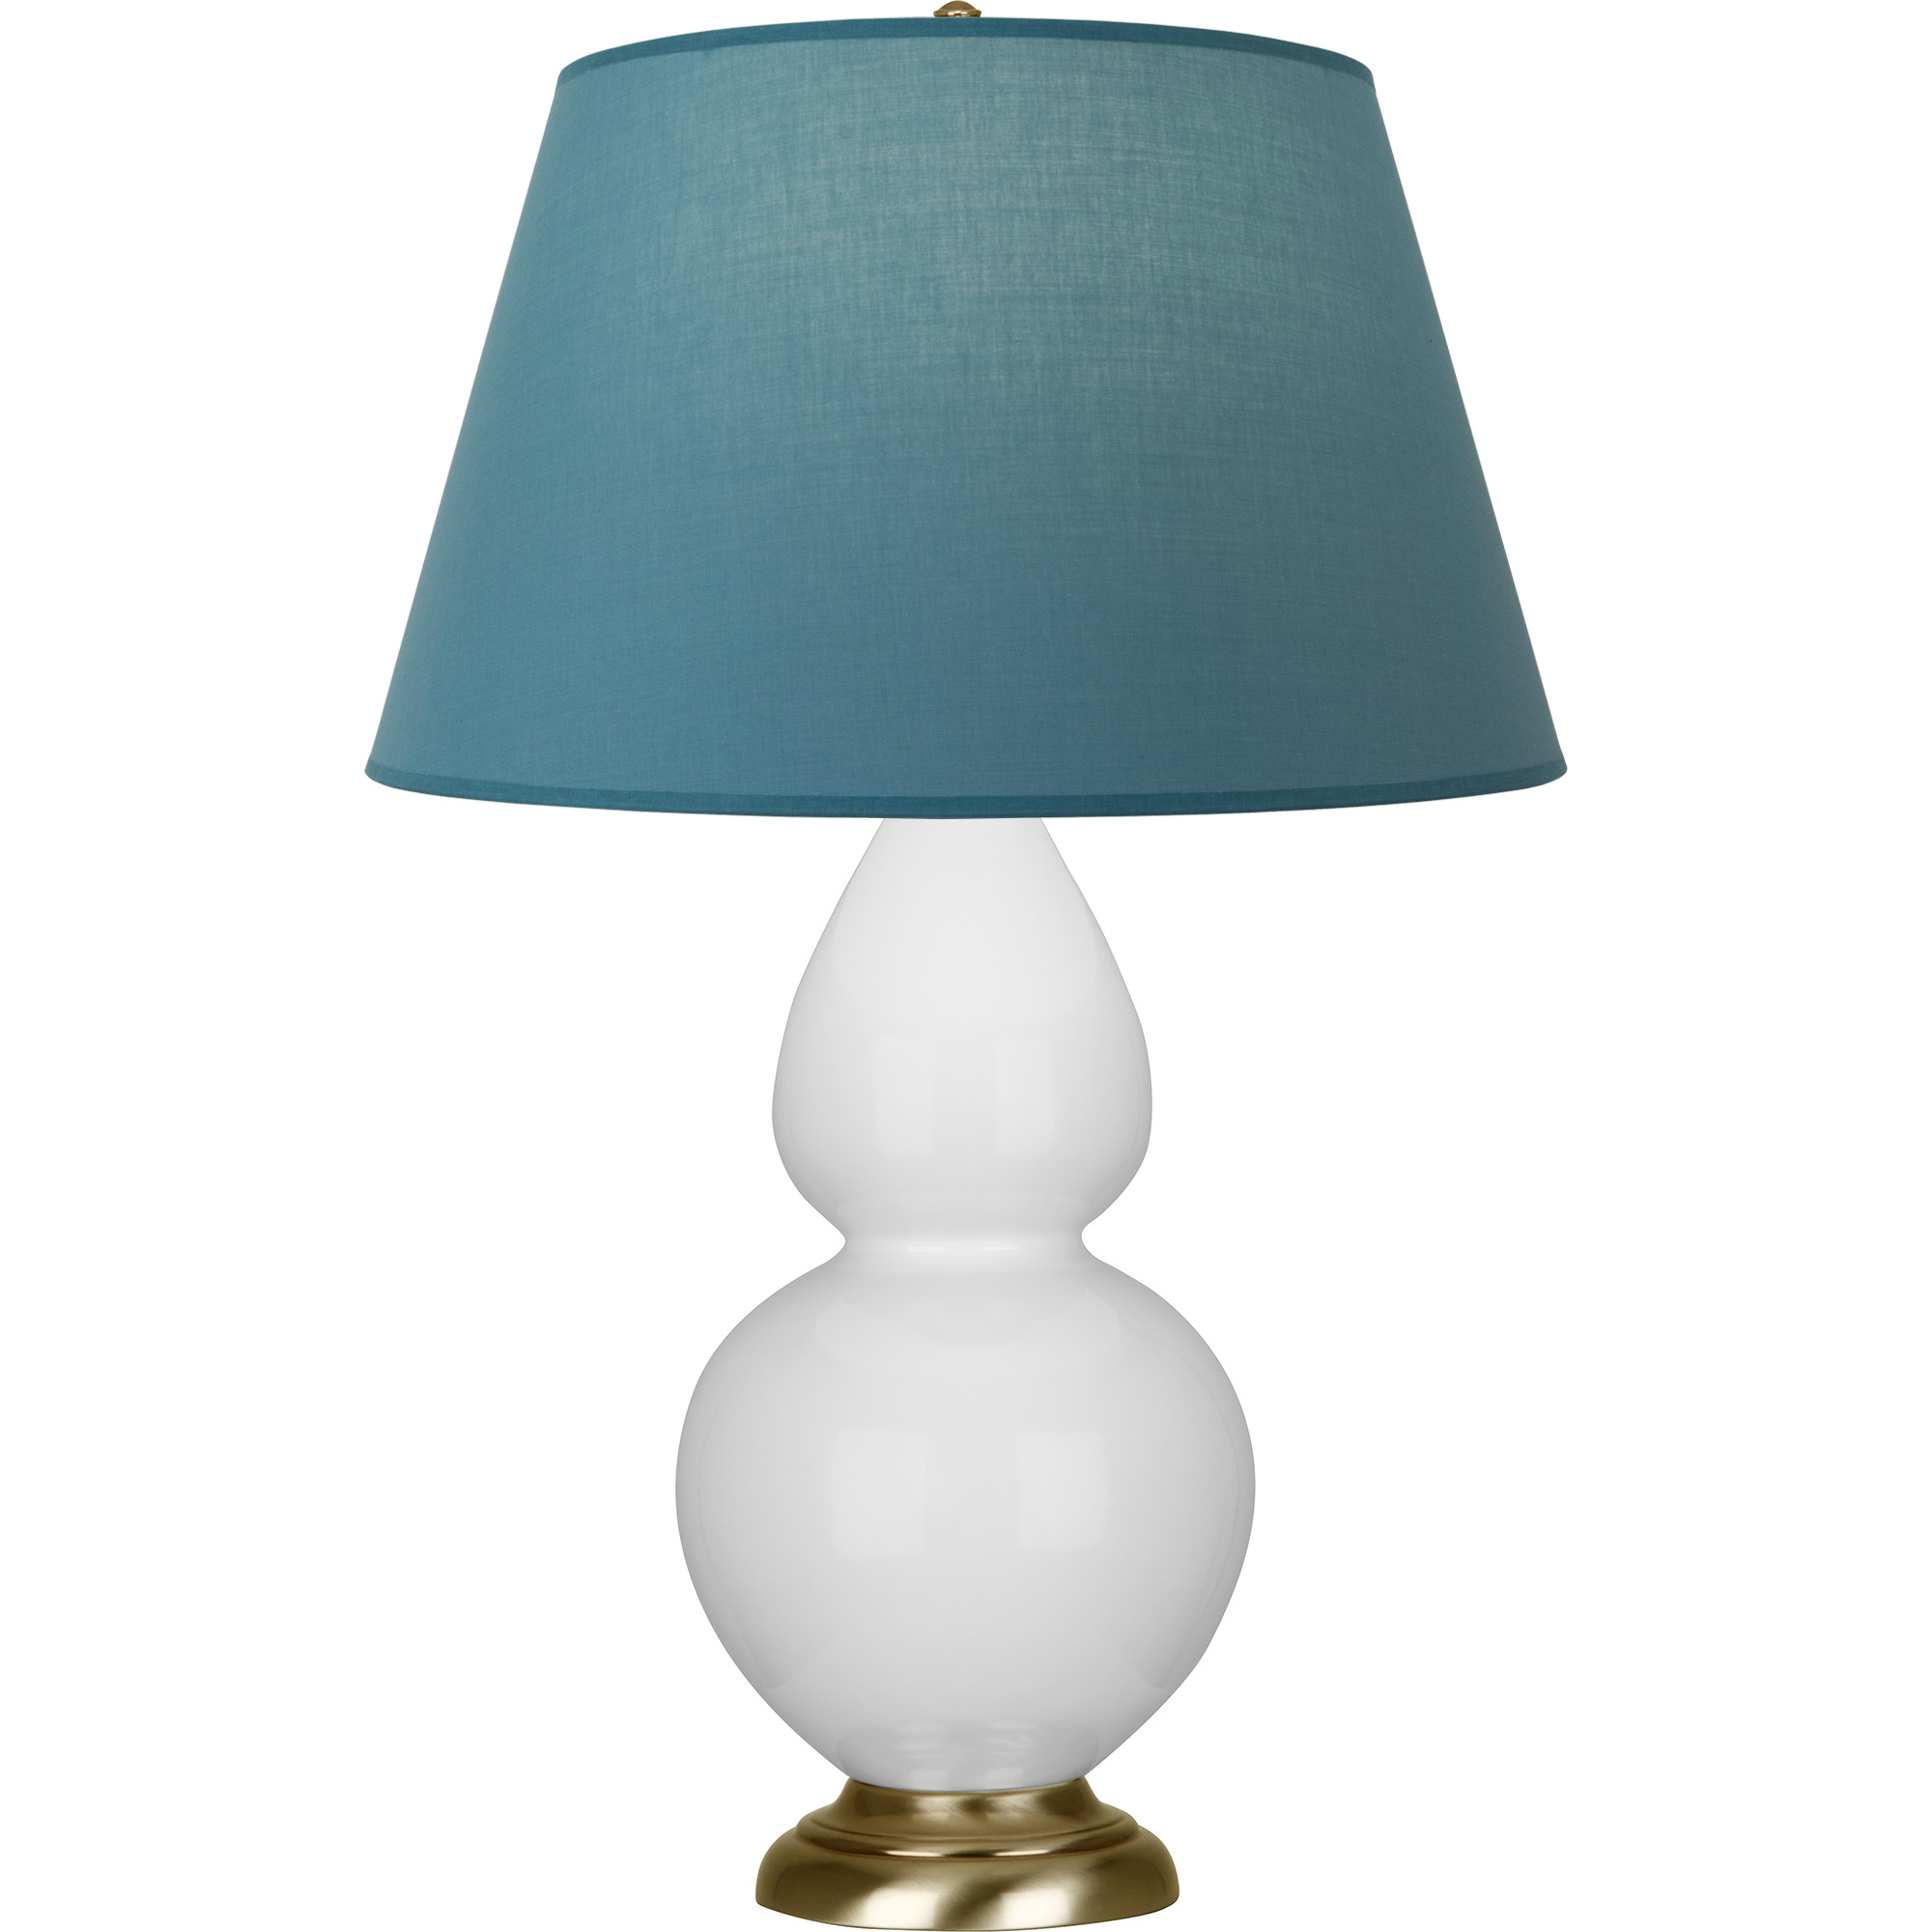 Double Gourd Table Lamp Style #DY20B